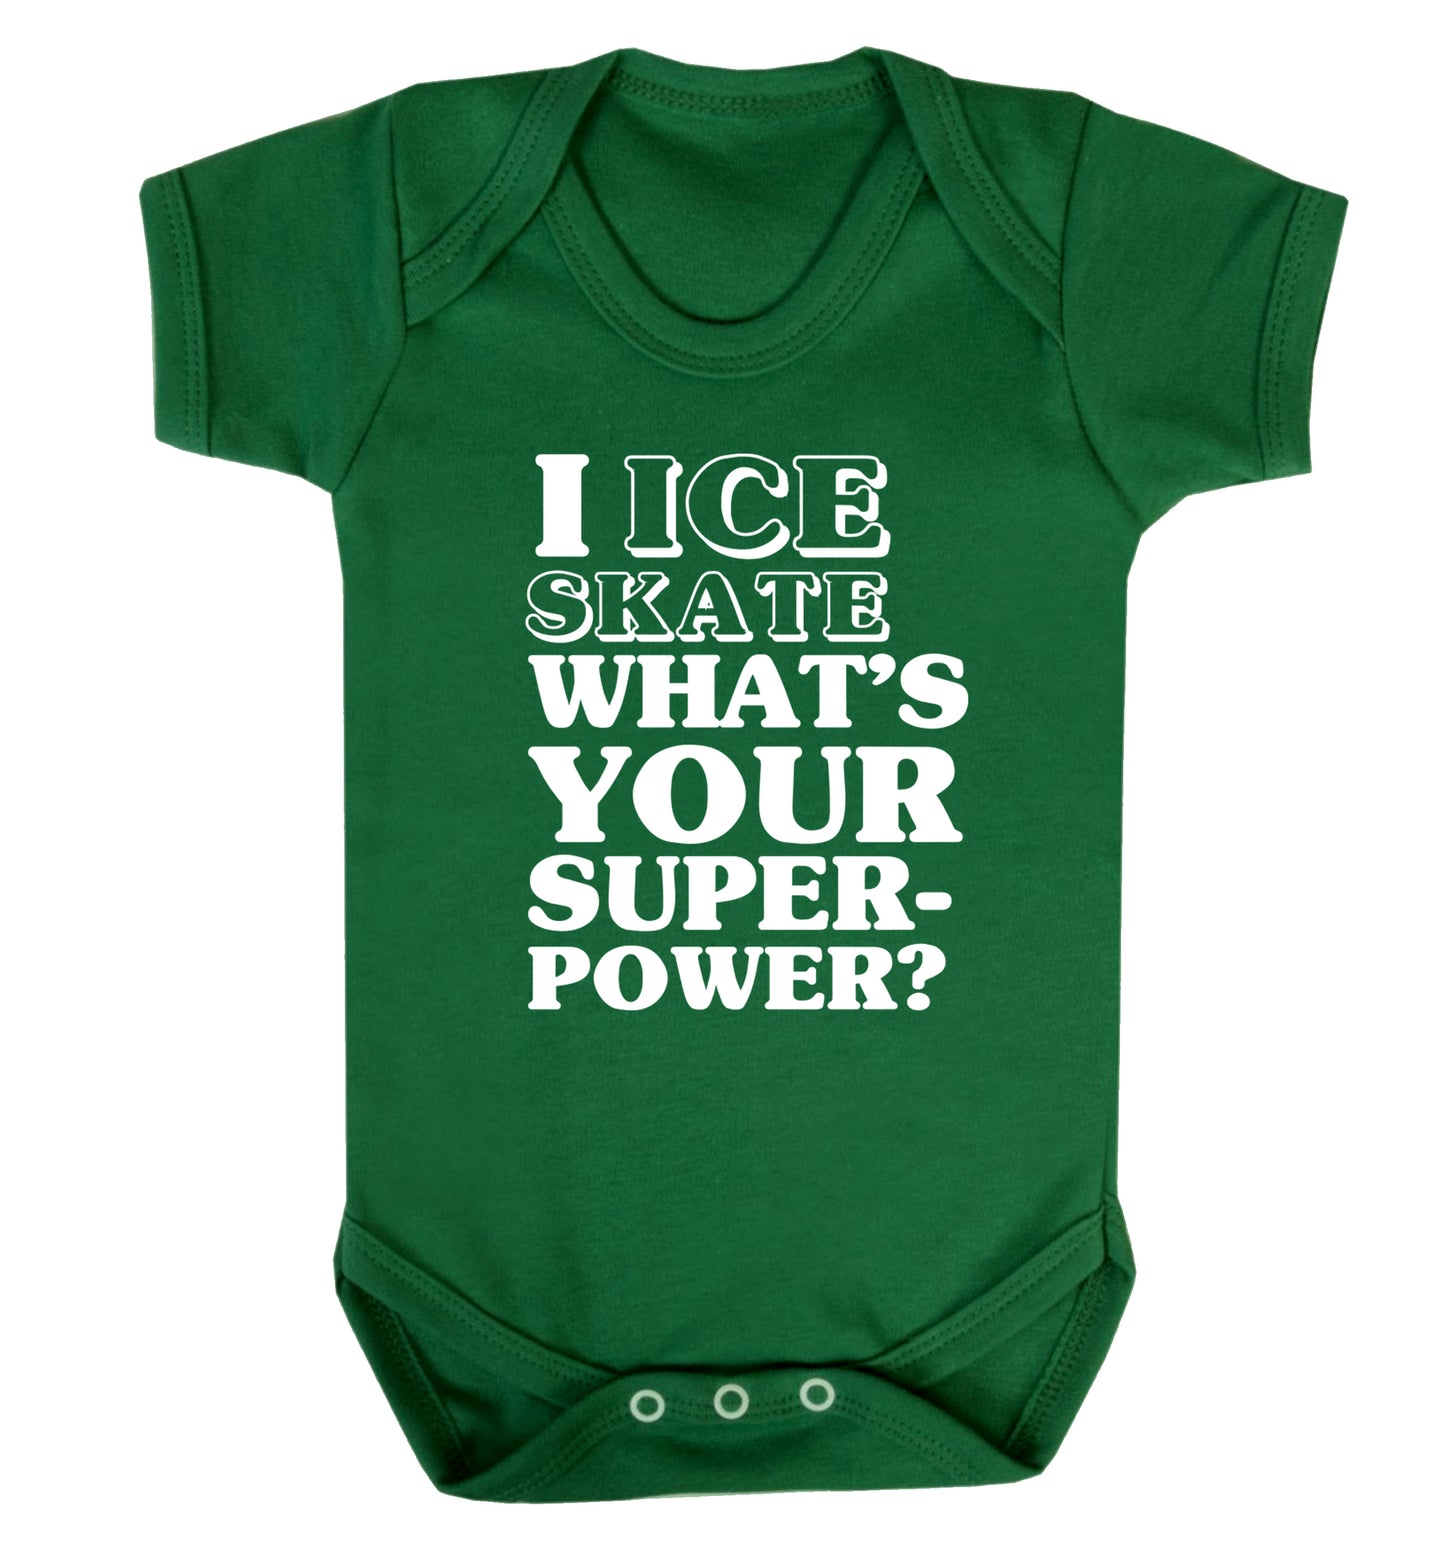 I ice skate what's your superpower? Baby Vest green 18-24 months